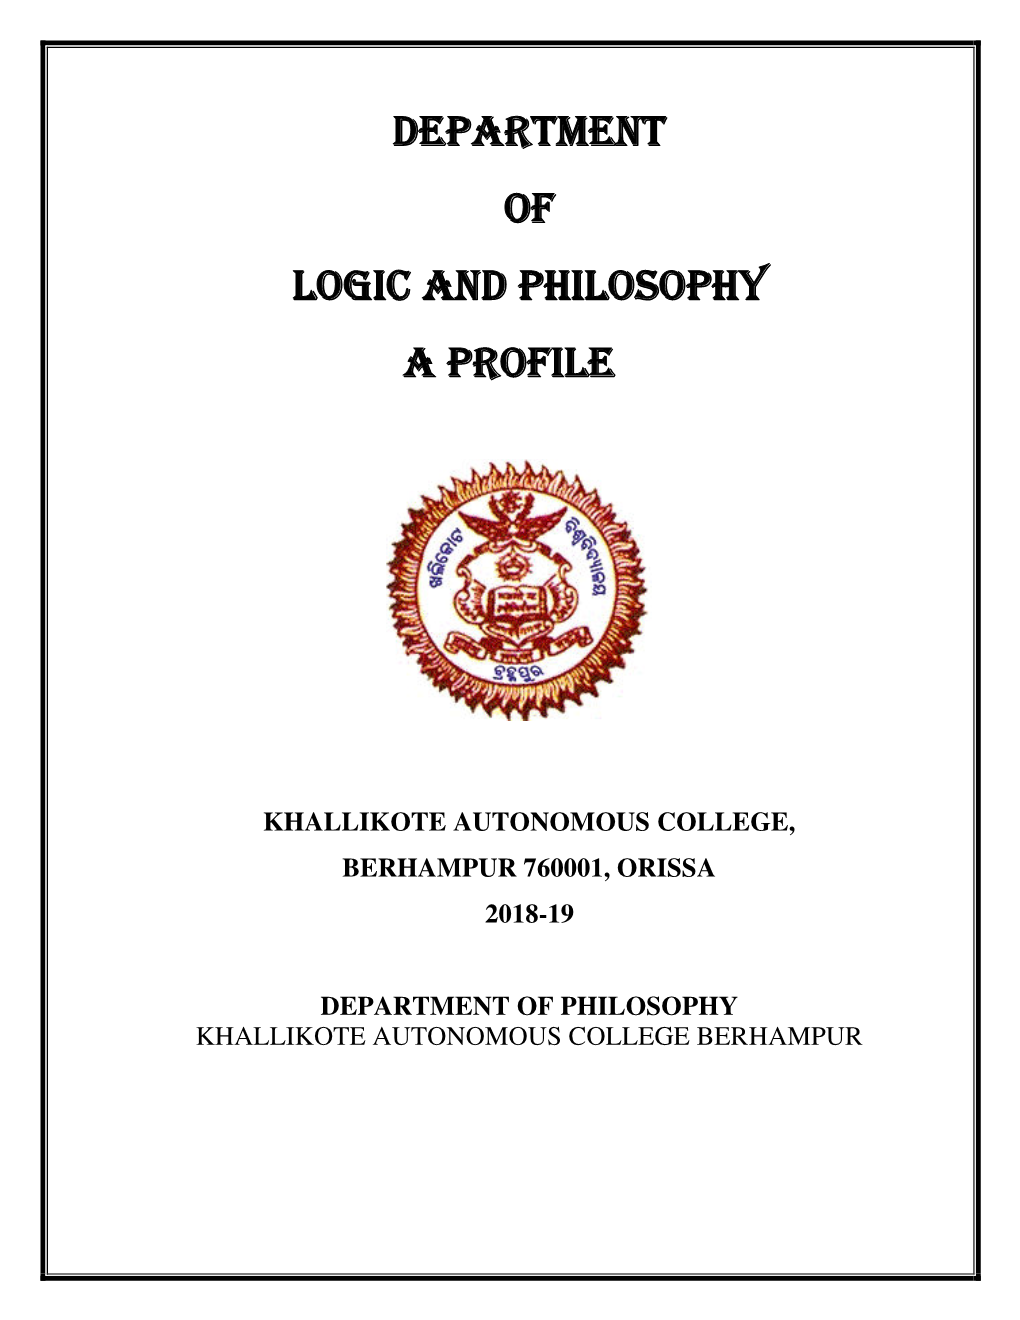 Department of Logic and Philosophy a Profile